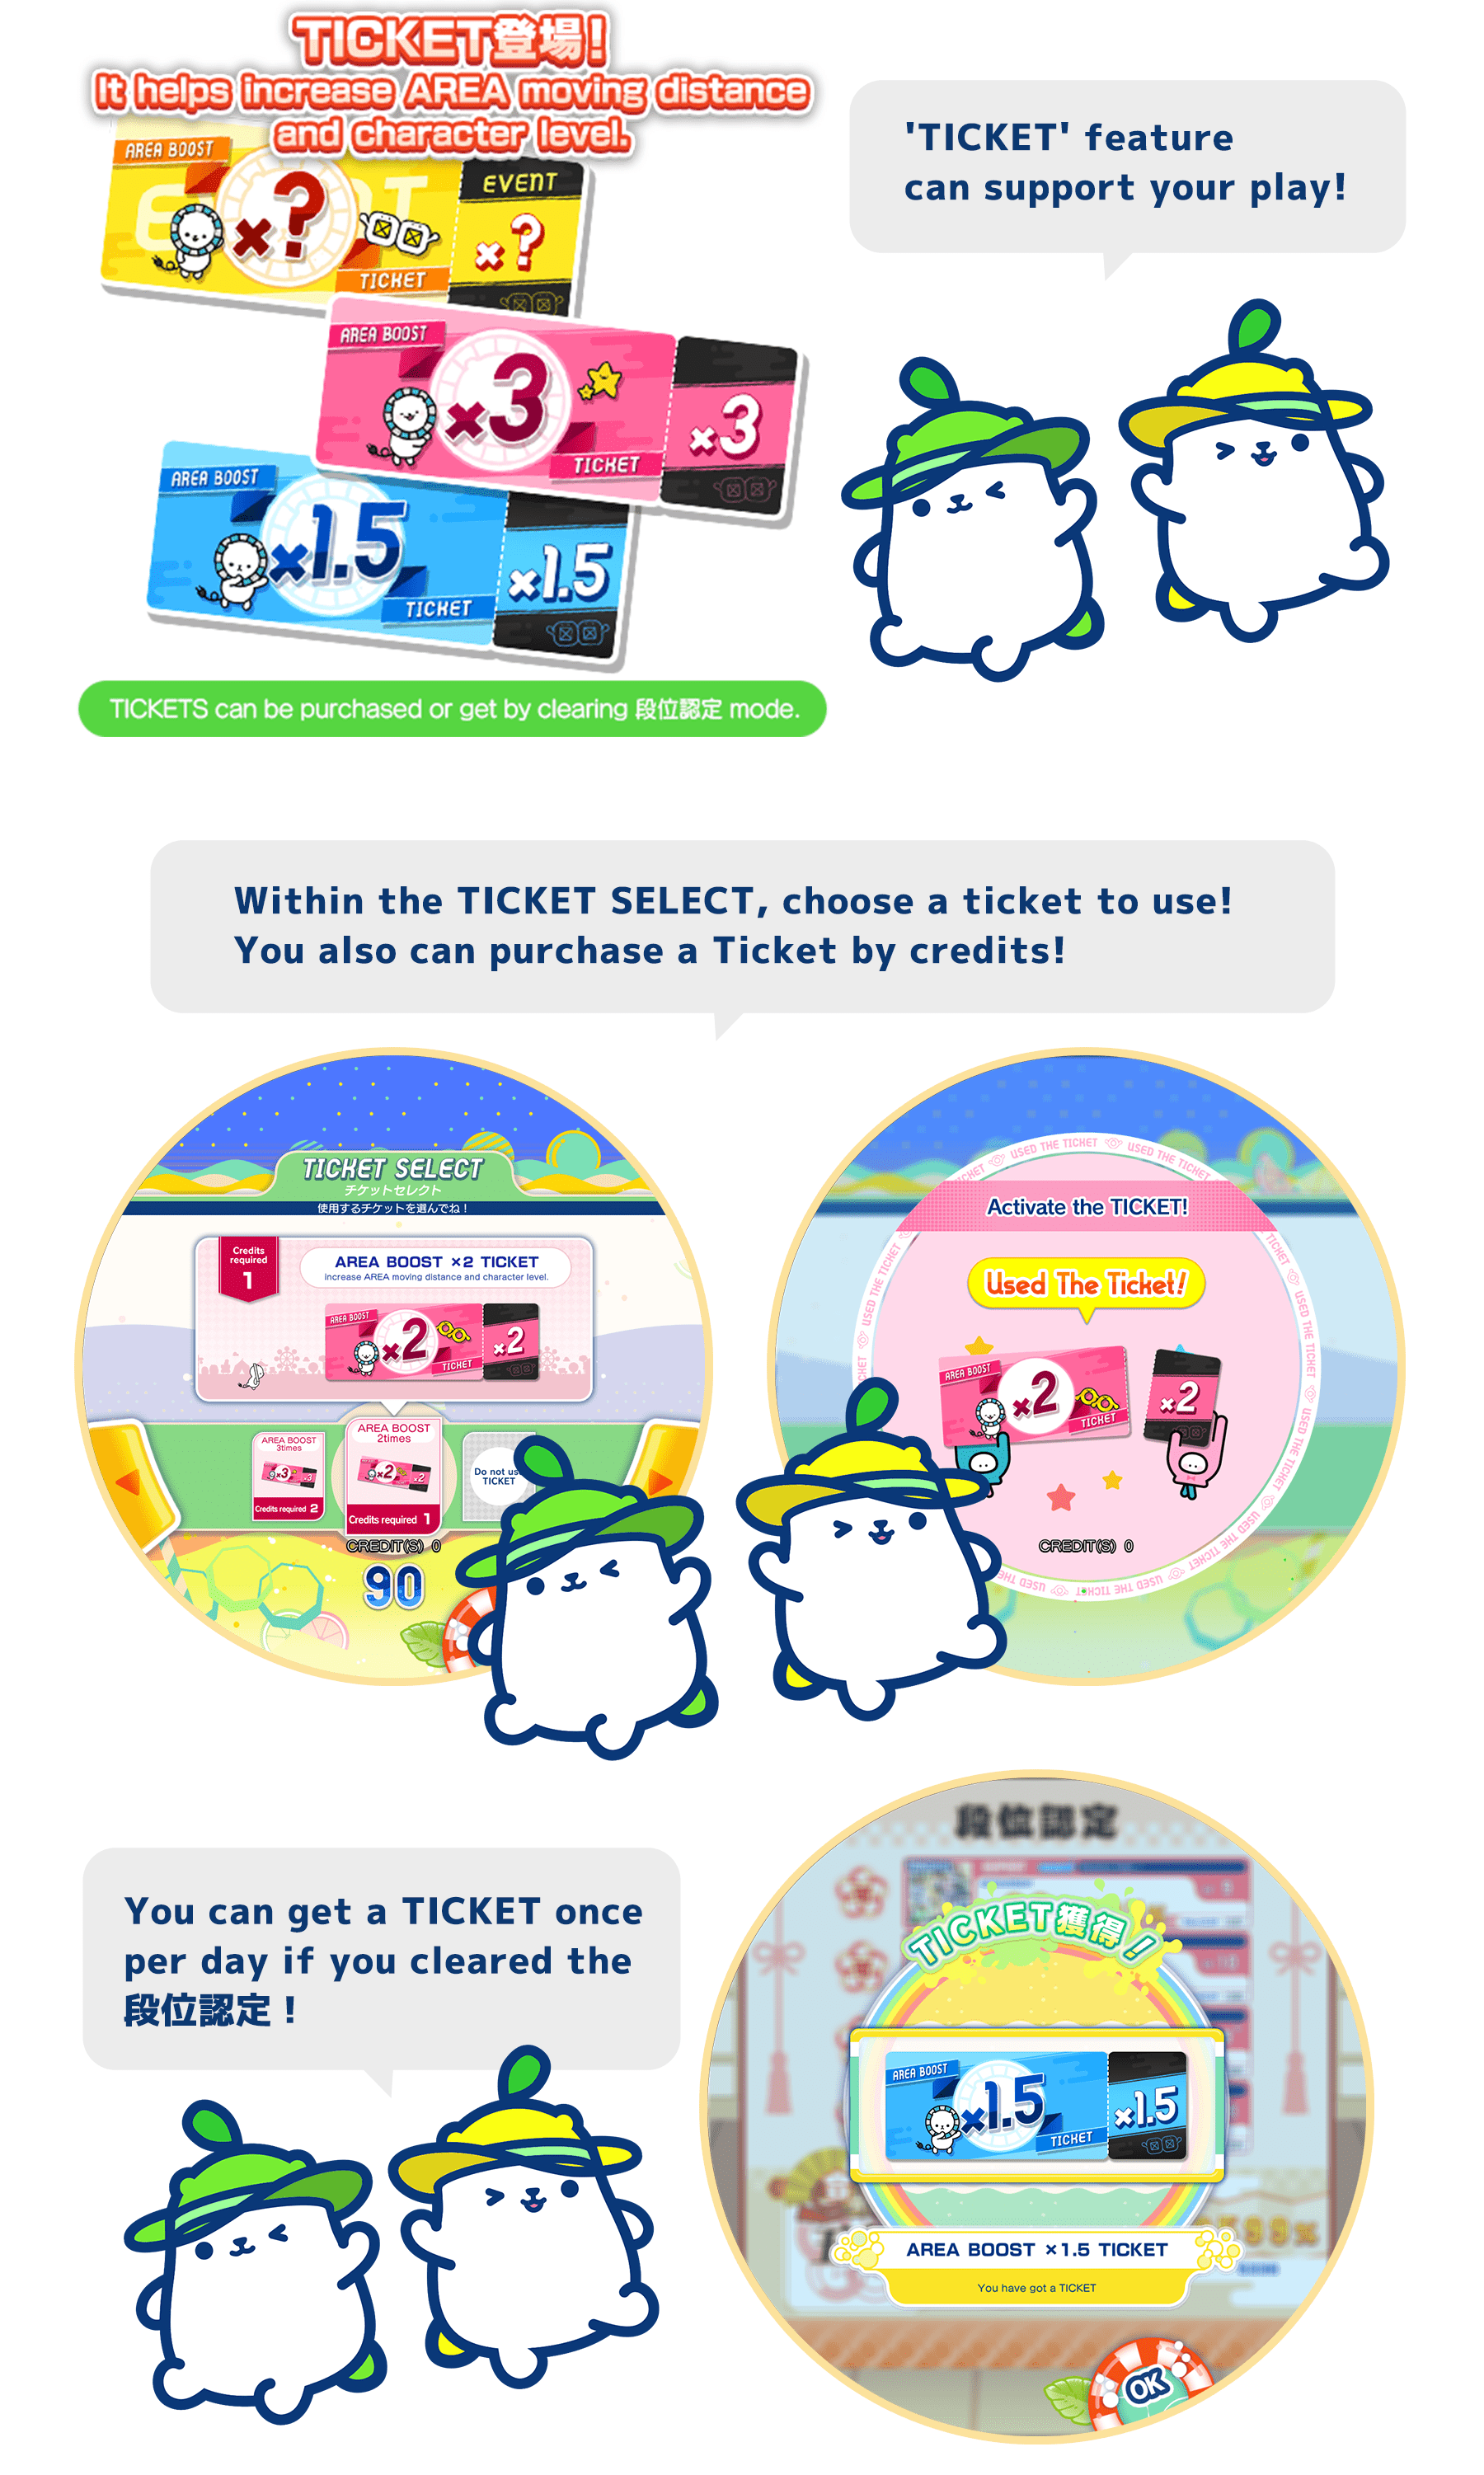 
          'TICKET' feature
can support your play!
Within the TICKET SELECT, choose a ticket to use!
You also can purchase a Ticket by credits!
You can get a TICKET once per day if you cleared the 段位認定!
          